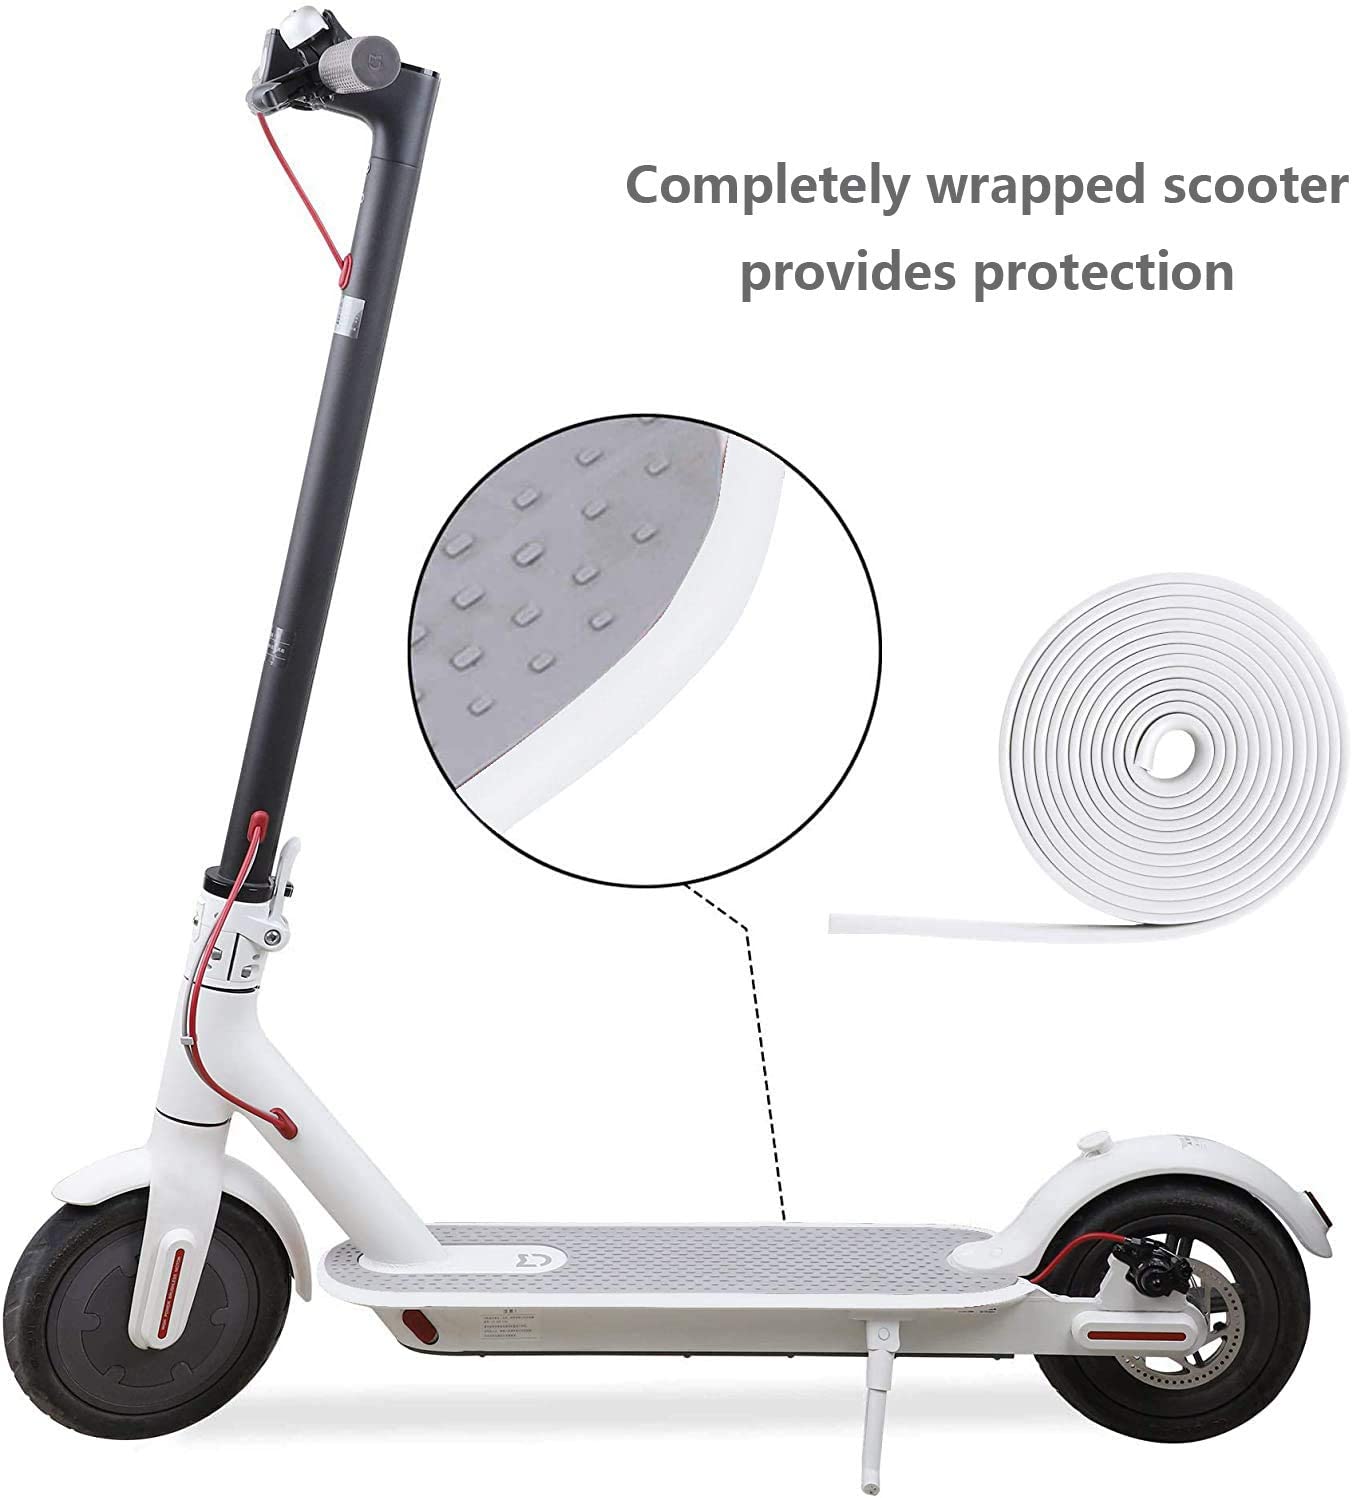 GLDYTIMES E-Scooter Body Anti-collision Strip Bumper Protective Body Strips Replacement for Mi M365 / Pro ＆ ES1 ES2 ES3 / Max G30 Electric Scooter Parts,Prevent the Scooter from Friction Damage